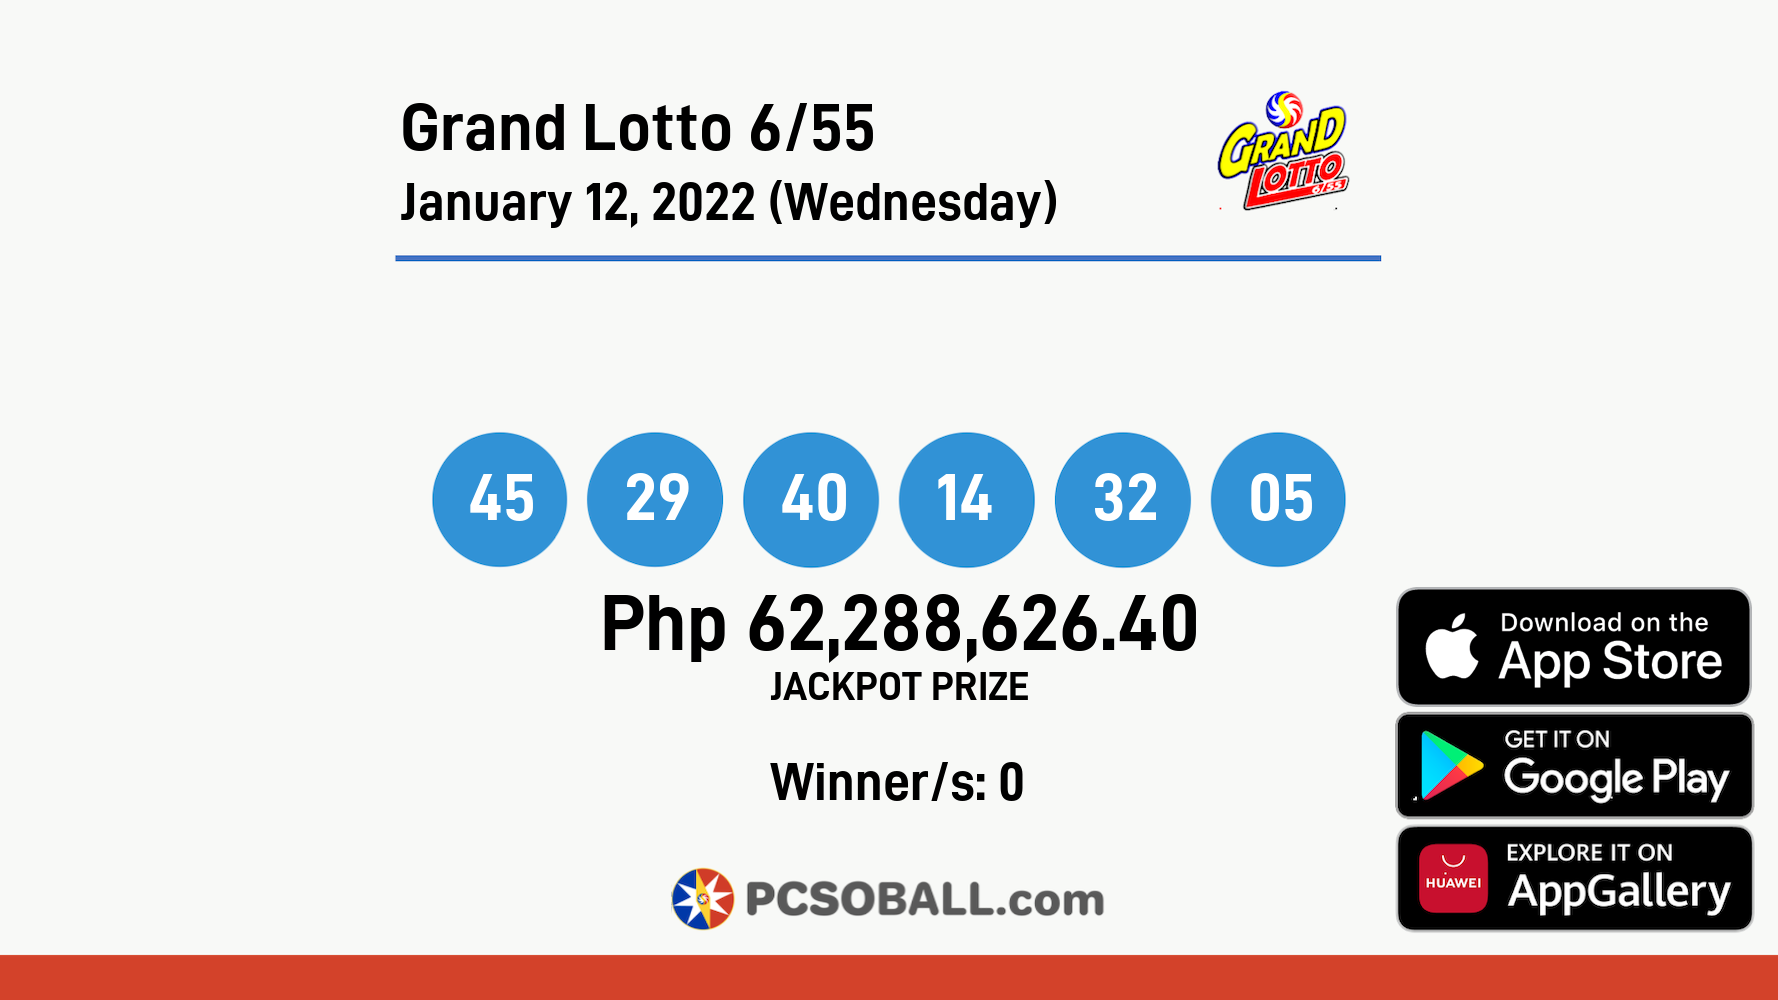 Grand Lotto 6/55 January 12, 2022 (Wednesday) Result